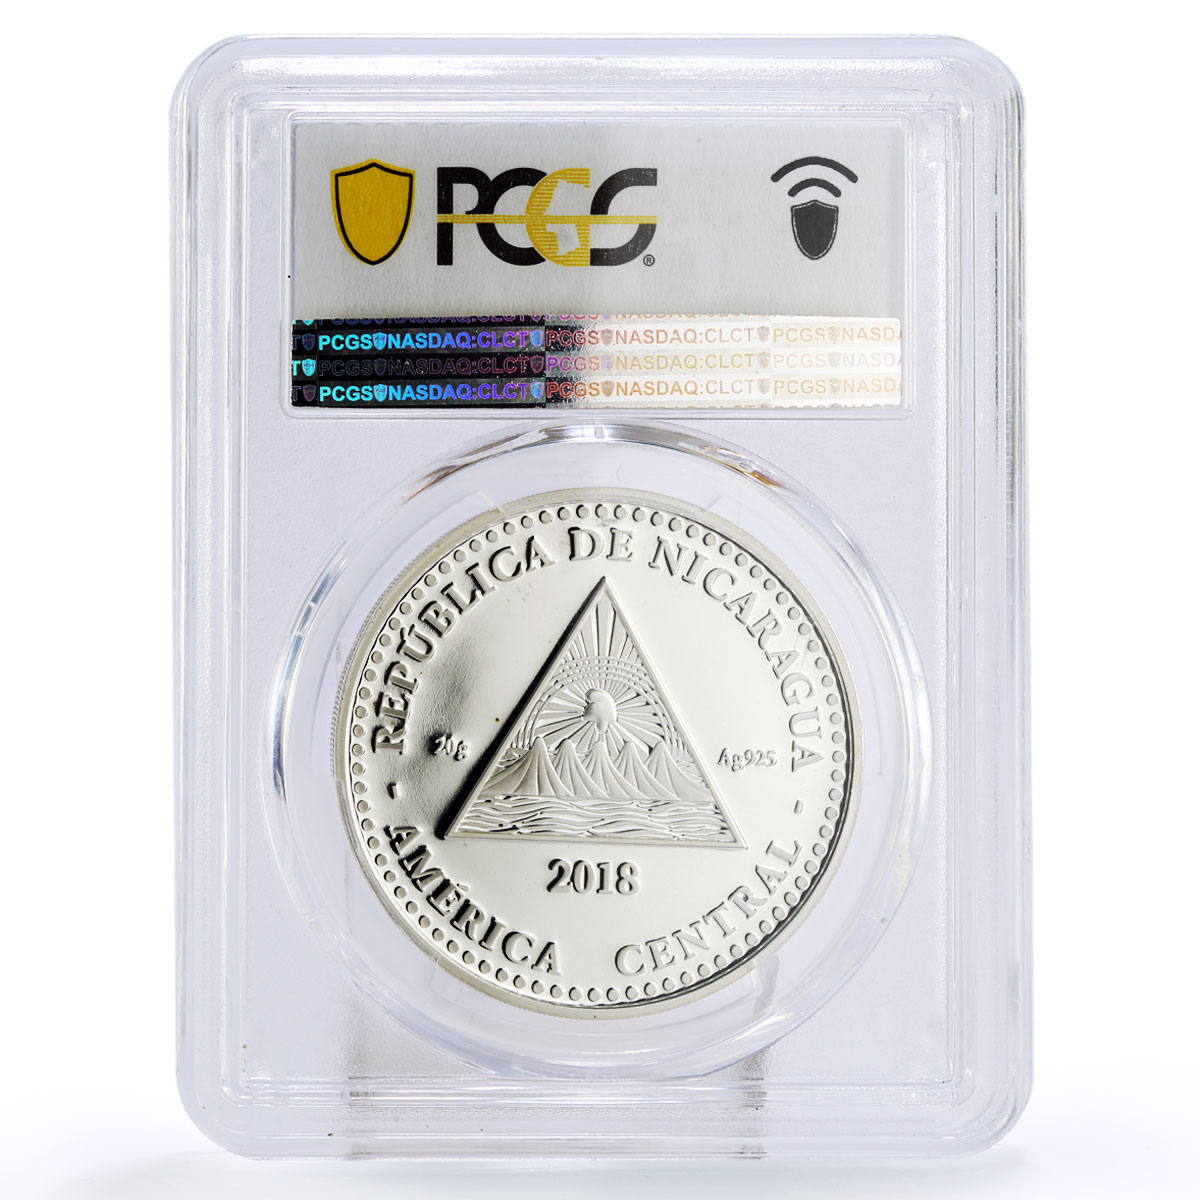 Nicaragua 5 cordobas Football World Cup in Russia PR69 PCGS silver coin 2018